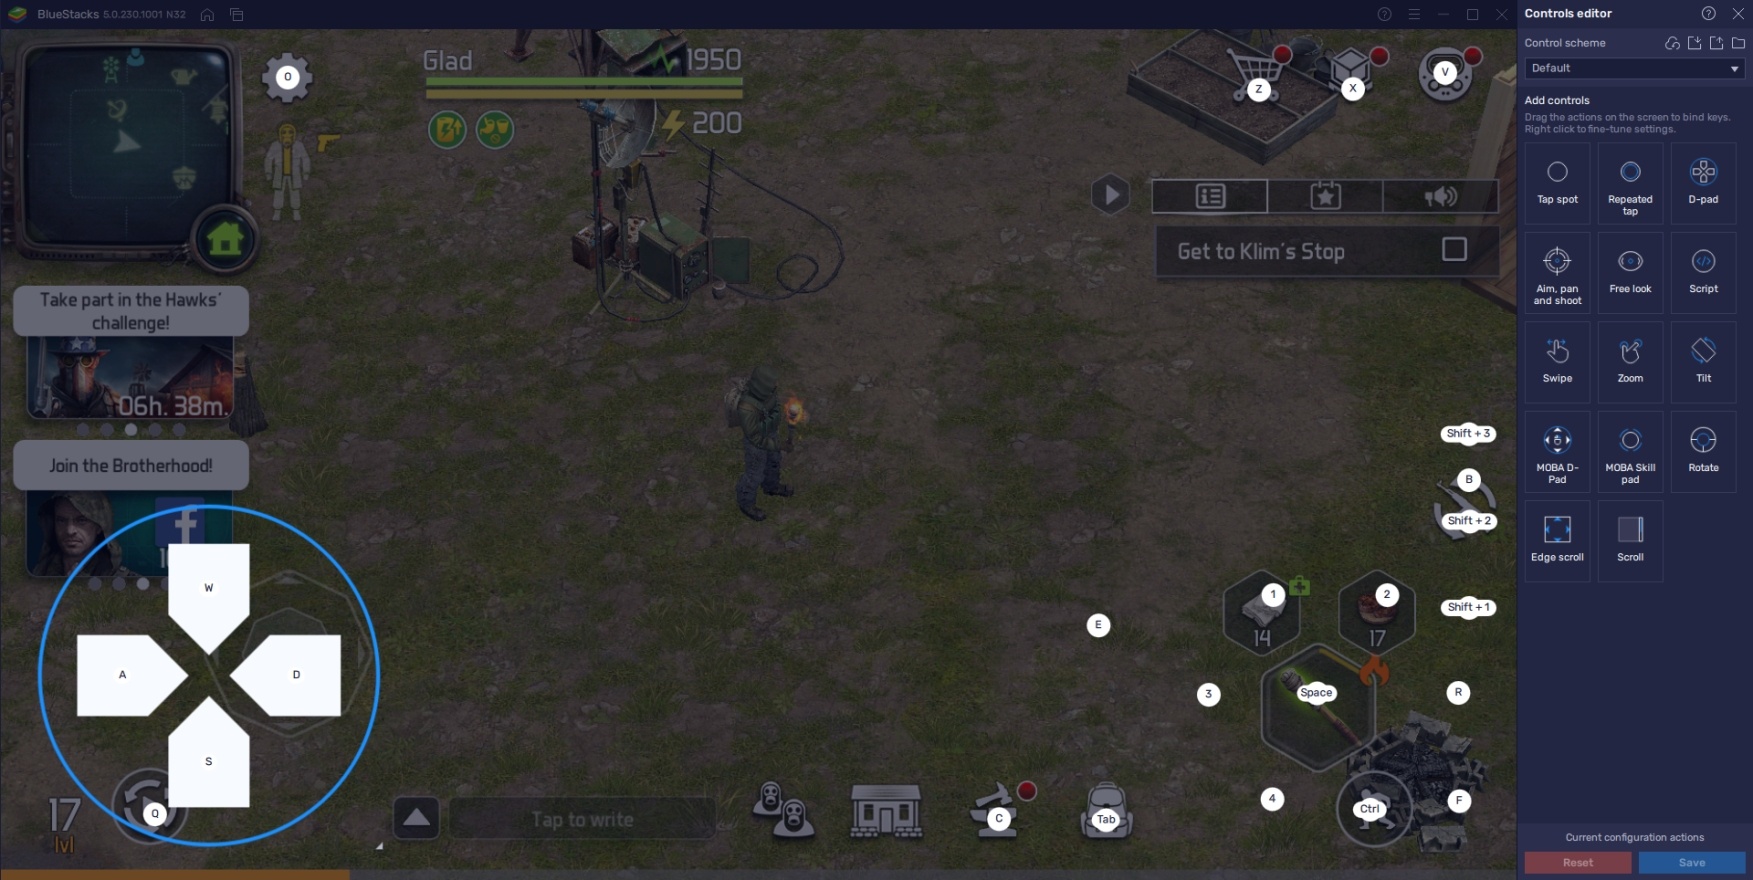 How to Play Dawn of Zombies on PC with BlueStacks